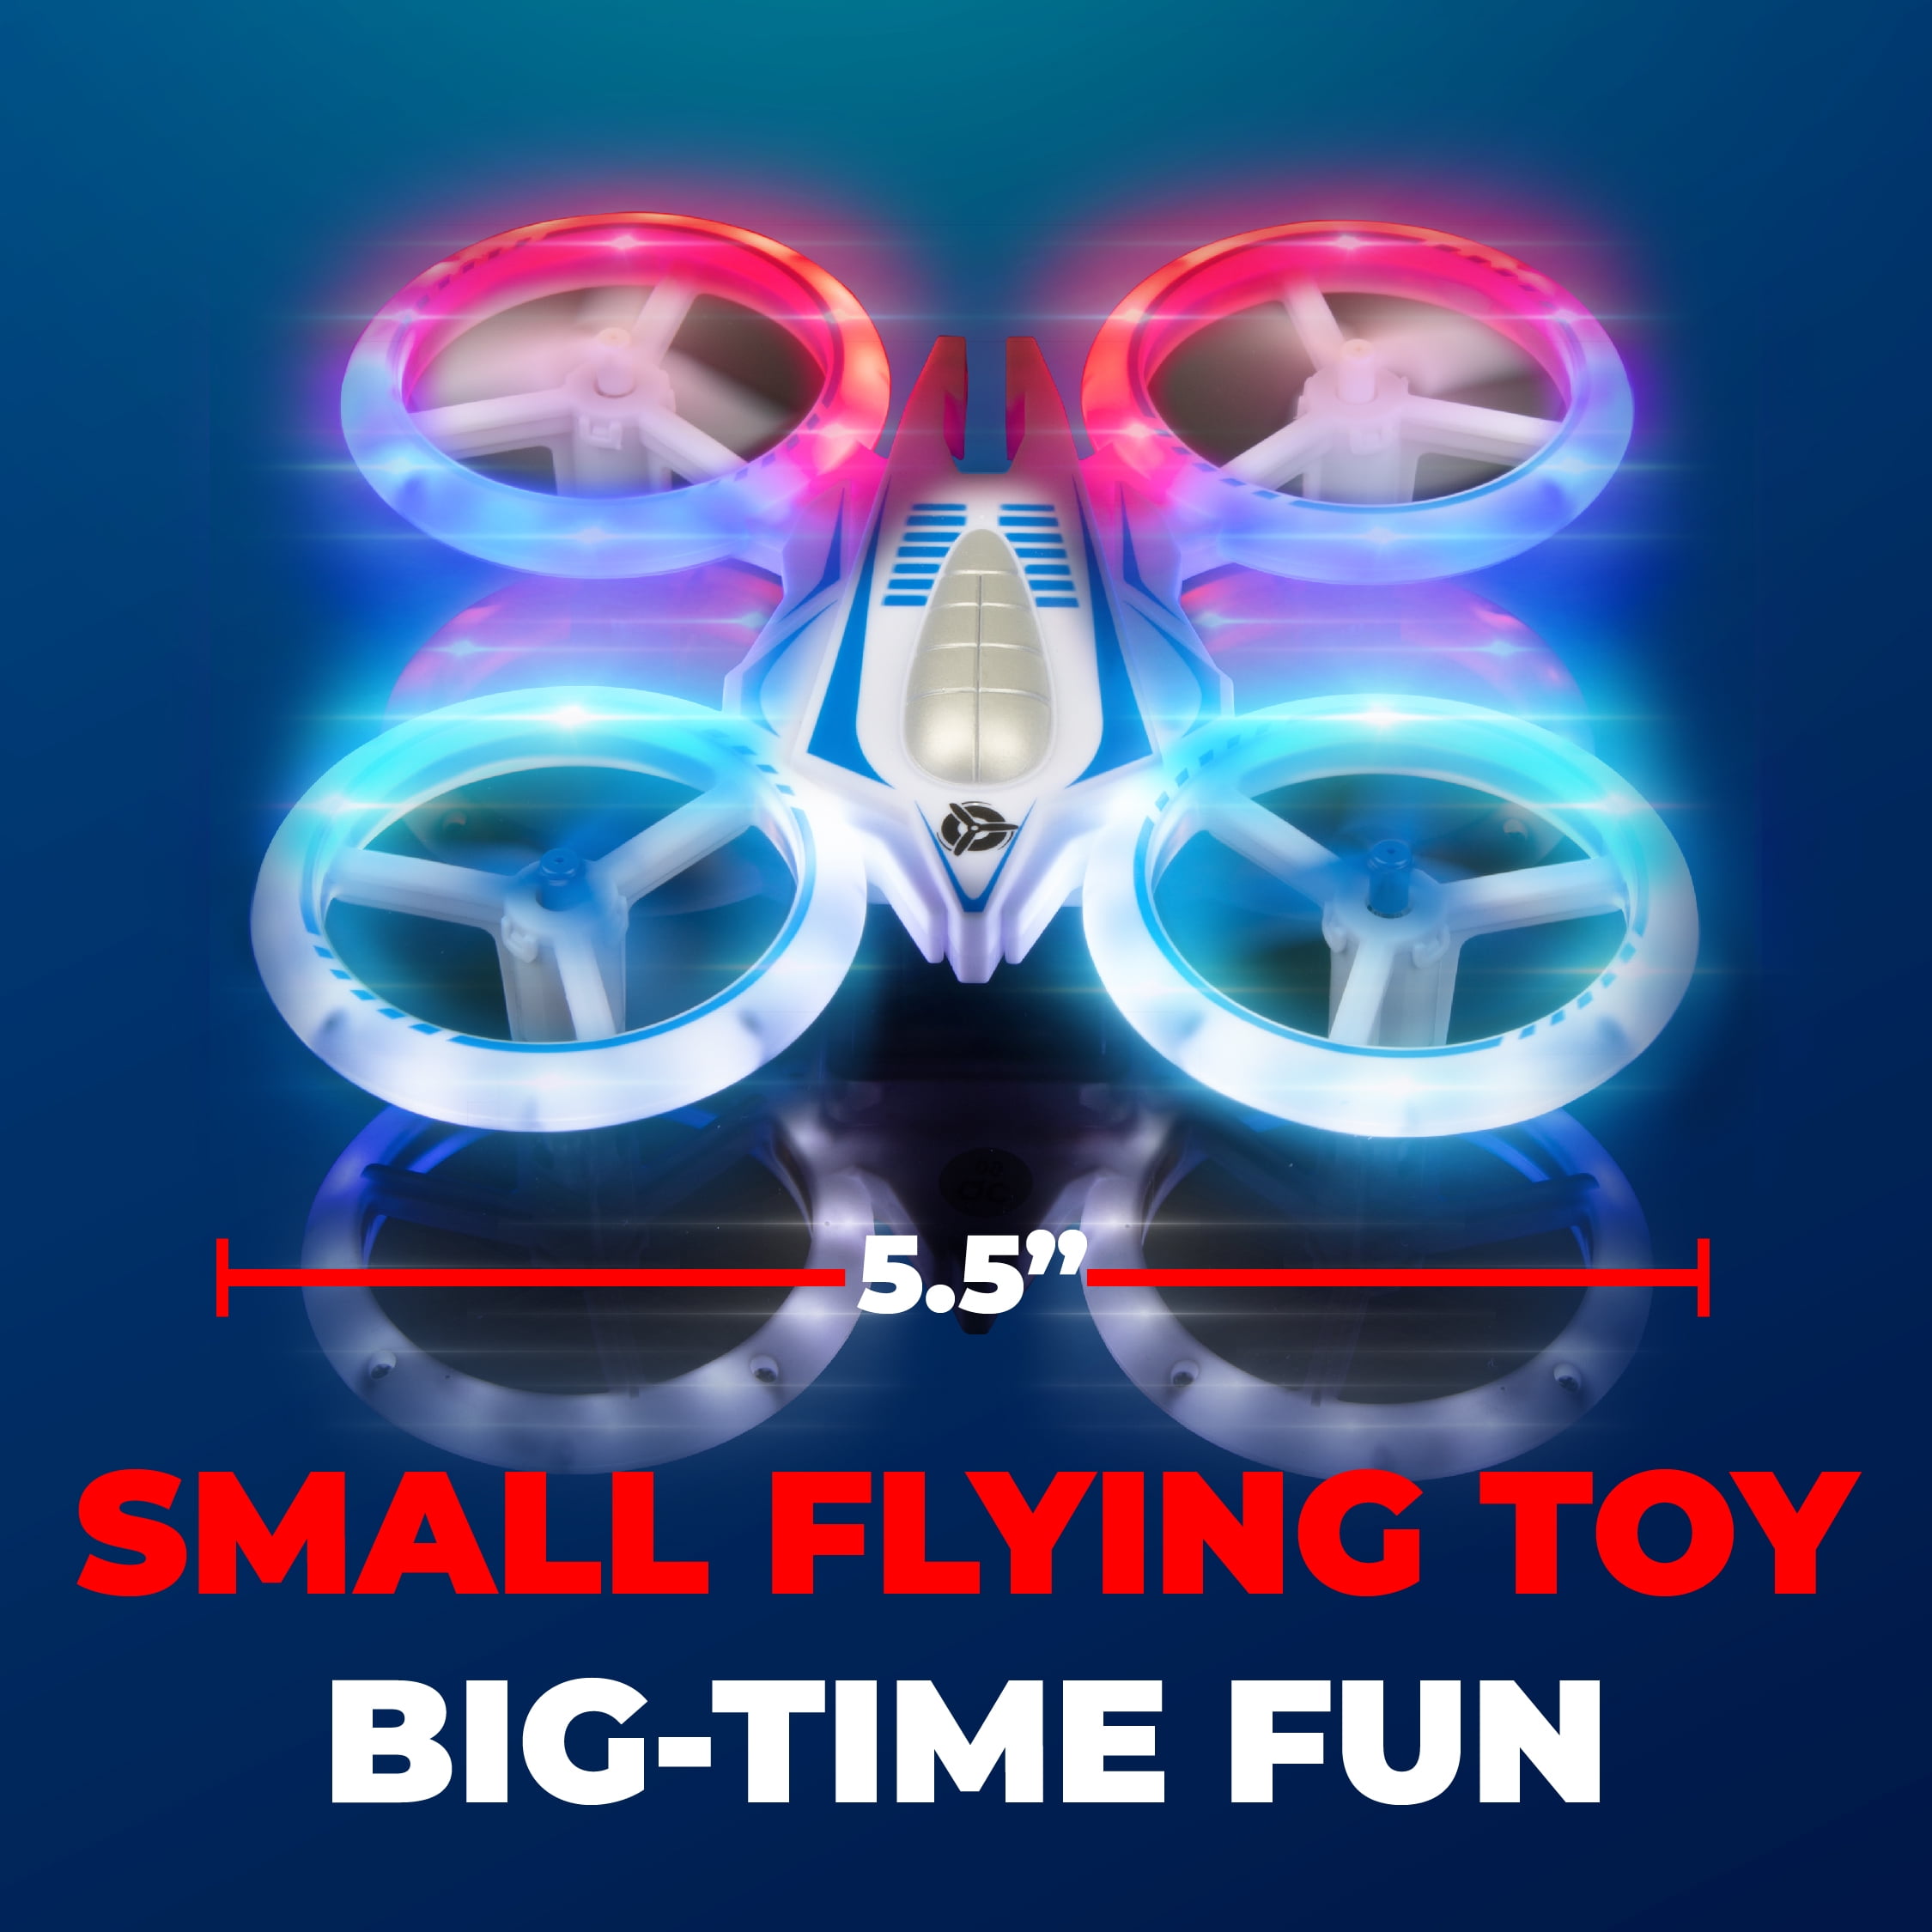 Force1 UFO 4000 LED Mini Drones for Kids Small RC Drones for Beginners w/ 2 Qu 